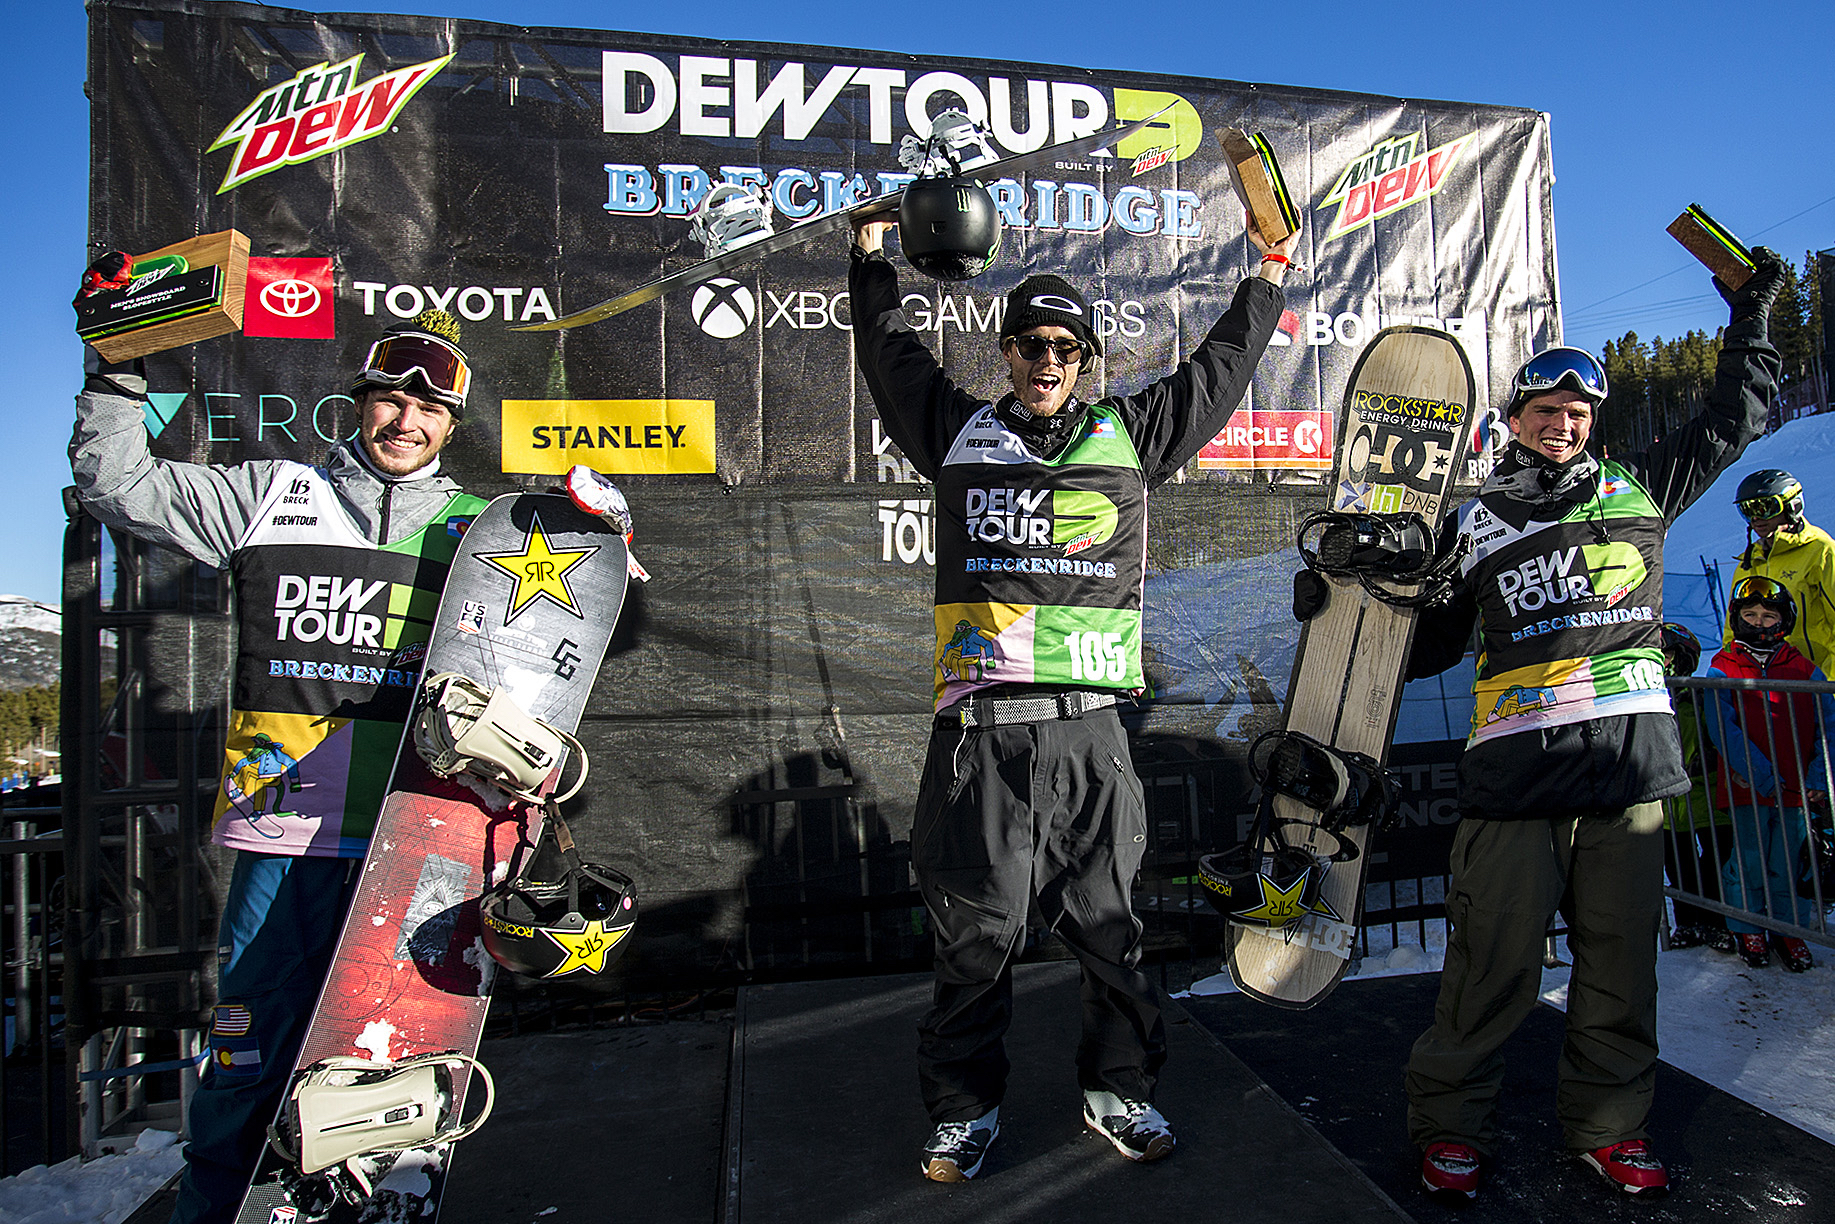 U.S. Athletes Finish Strong on Final Day of Dew Tour